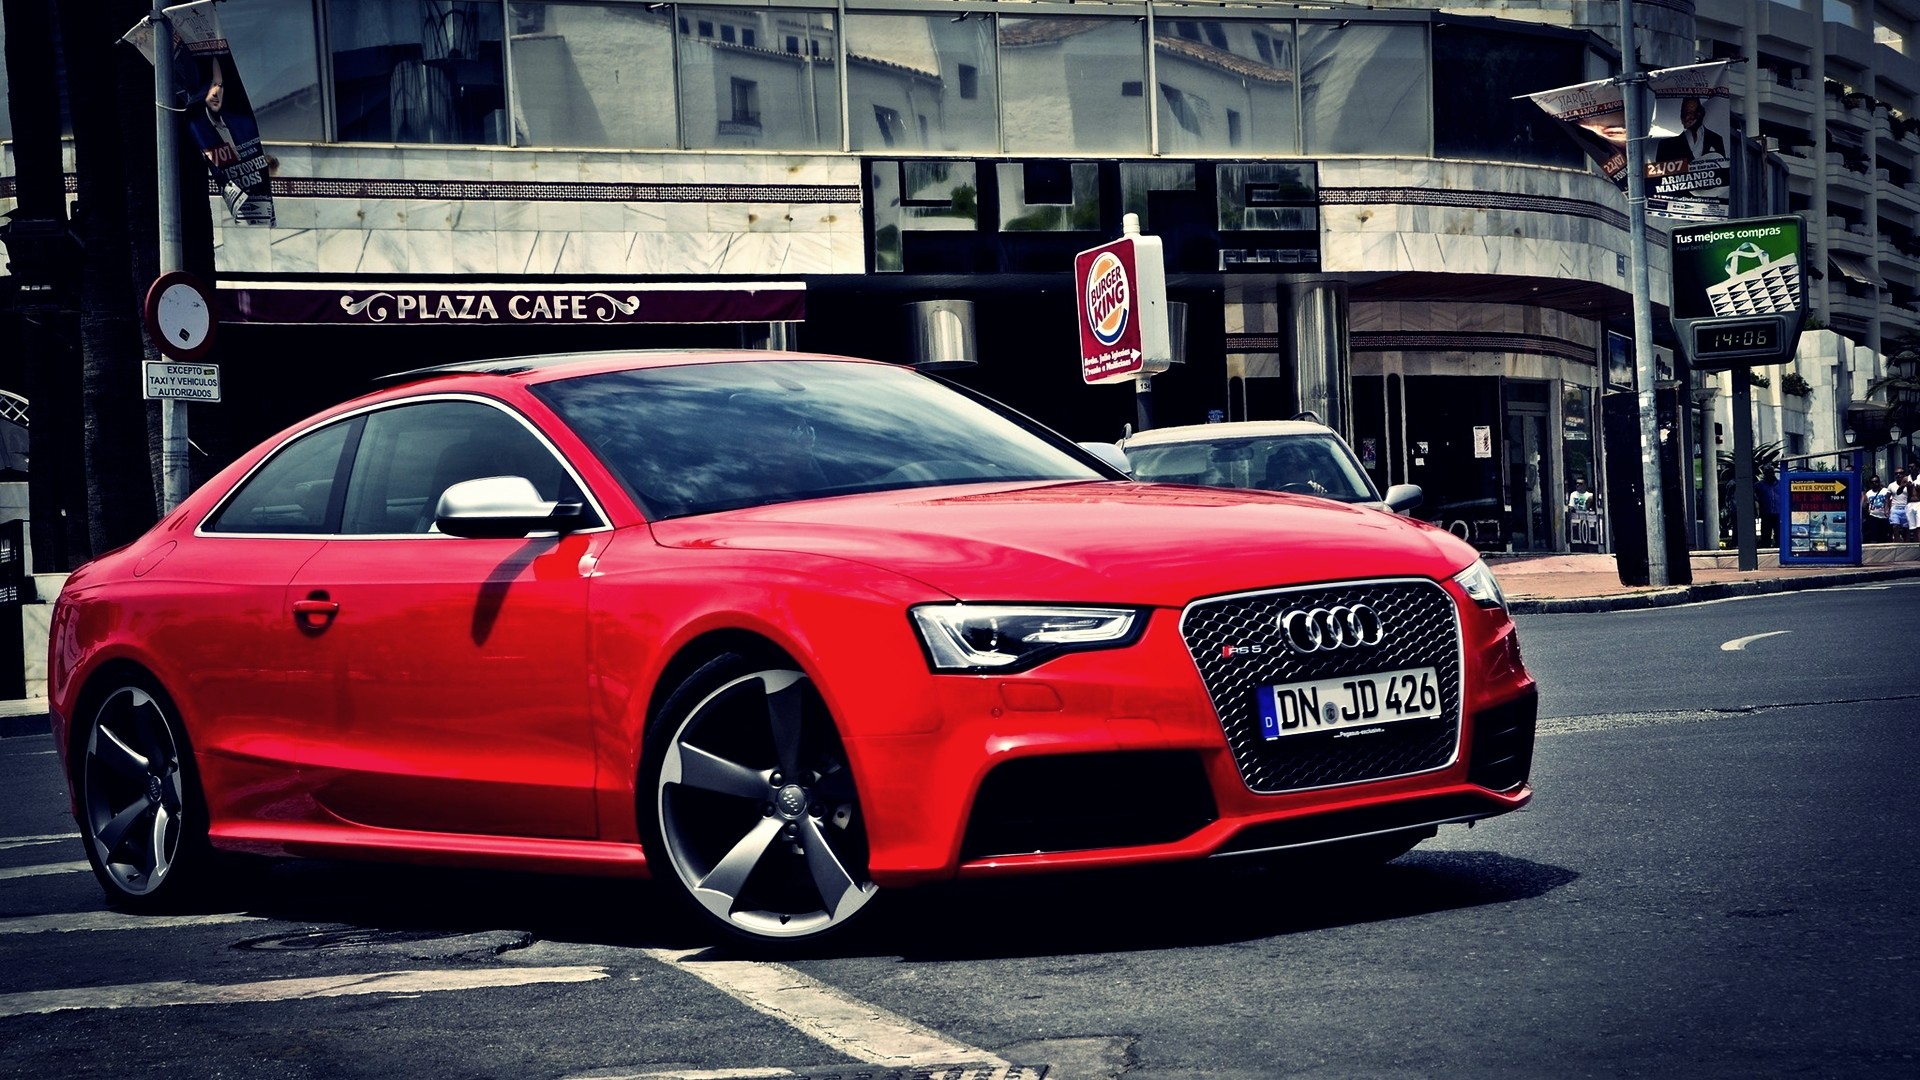 Audi Rs5 Full HD Wallpaper And Hintergrund